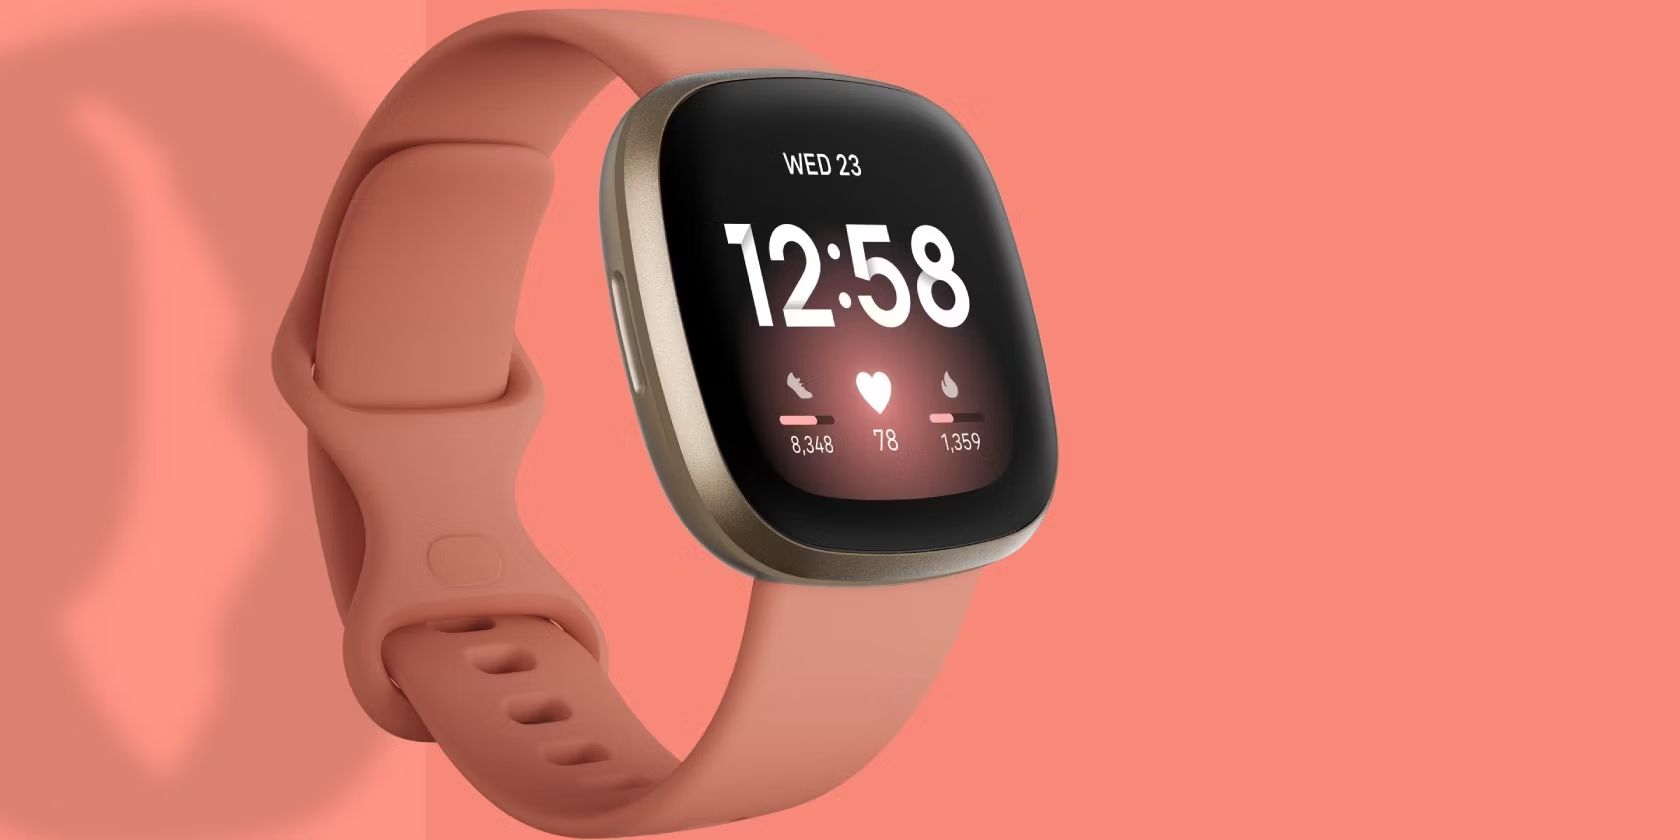 Identifying Versa: A Guide To Determining Your Fitbit Versa Model